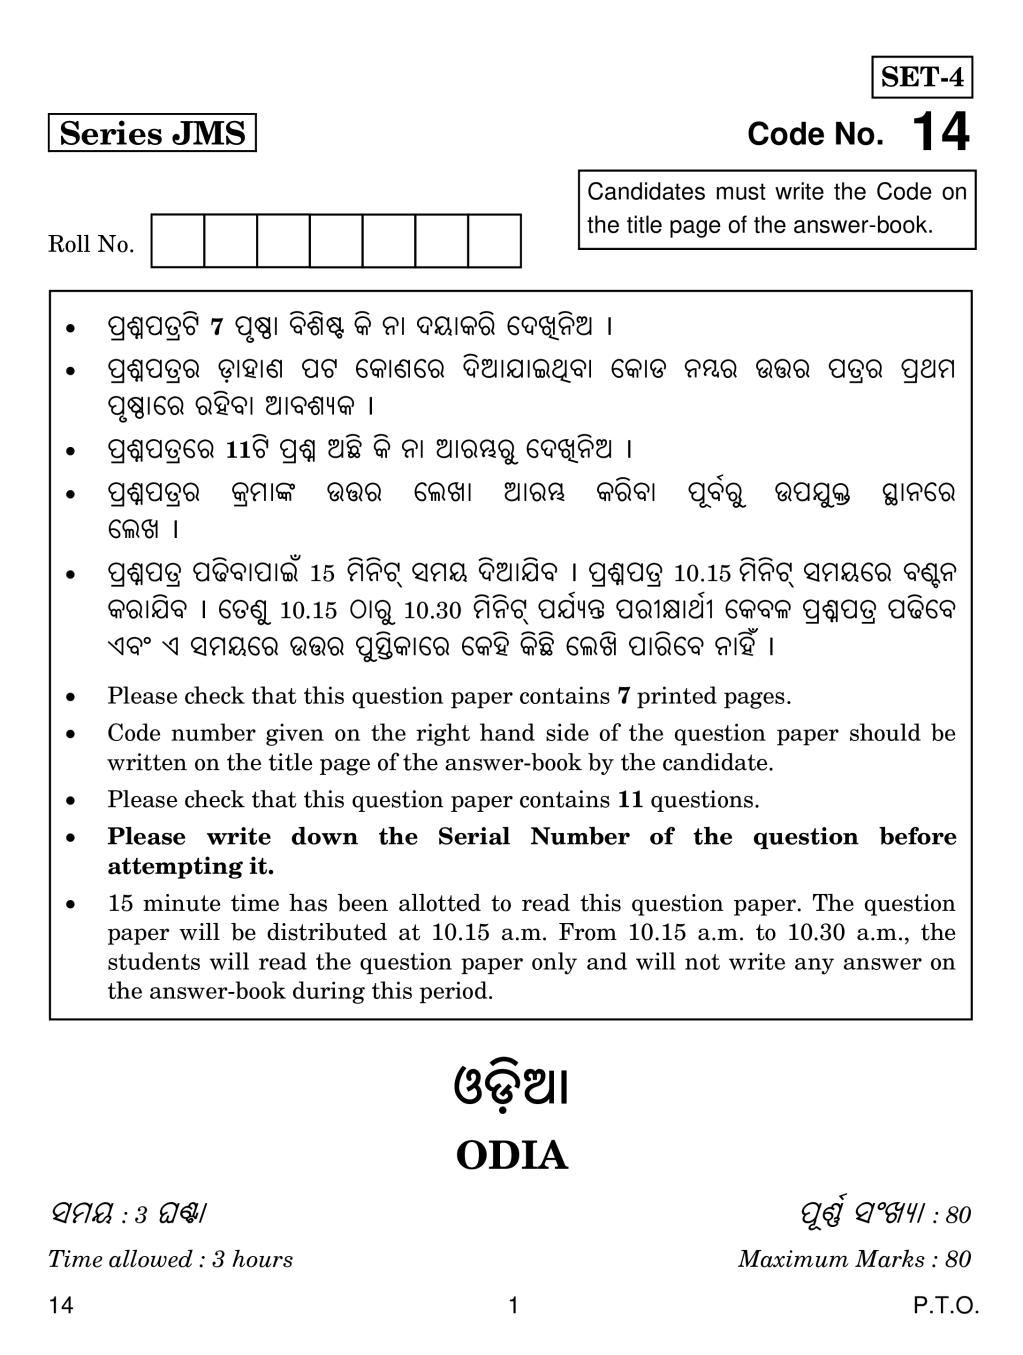 CBSE Class 10 Odia Question Paper 2019 - Page 1